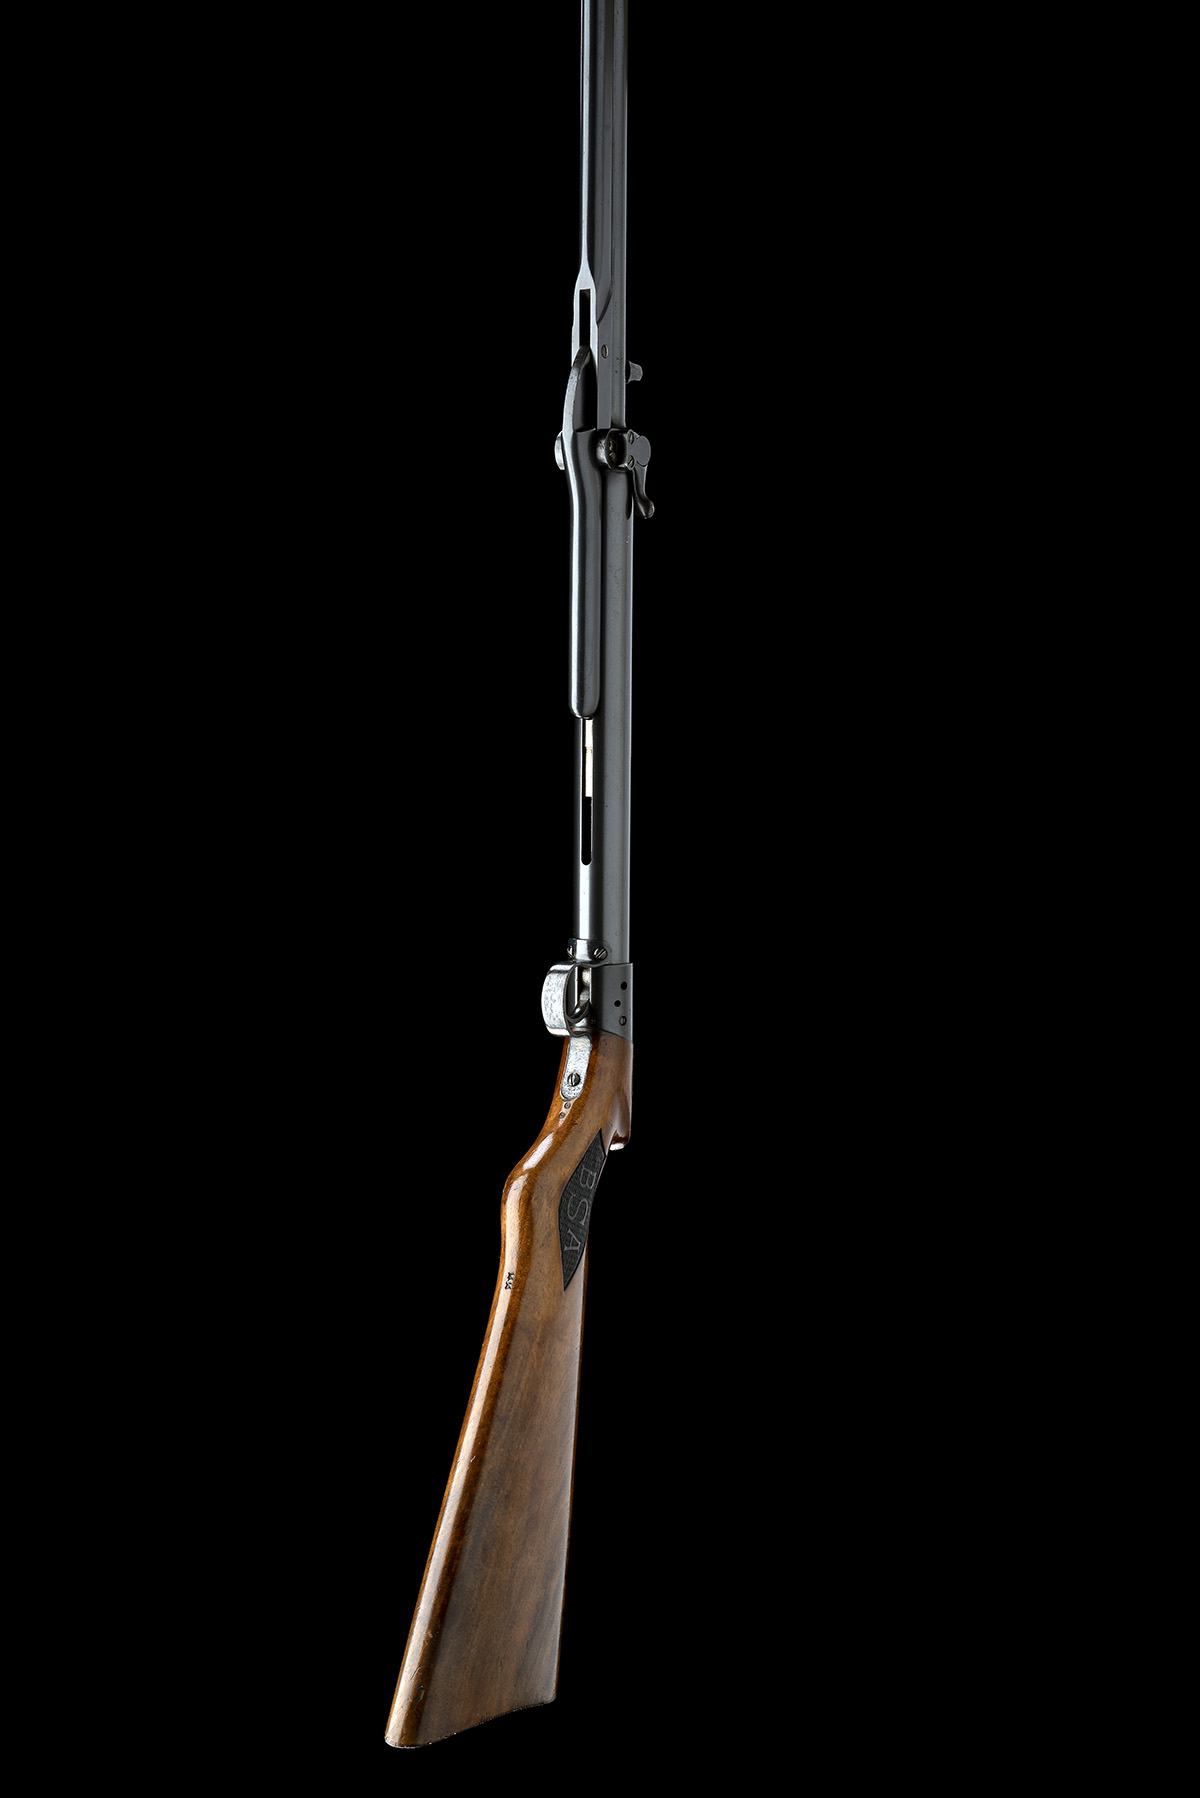 BSA, BIRMINGHAM A GOOD .22 UNDER-LEVER AIR-RIFLE, MODEL 'STANDARD', serial no. S37908, for 1928, - Image 8 of 9